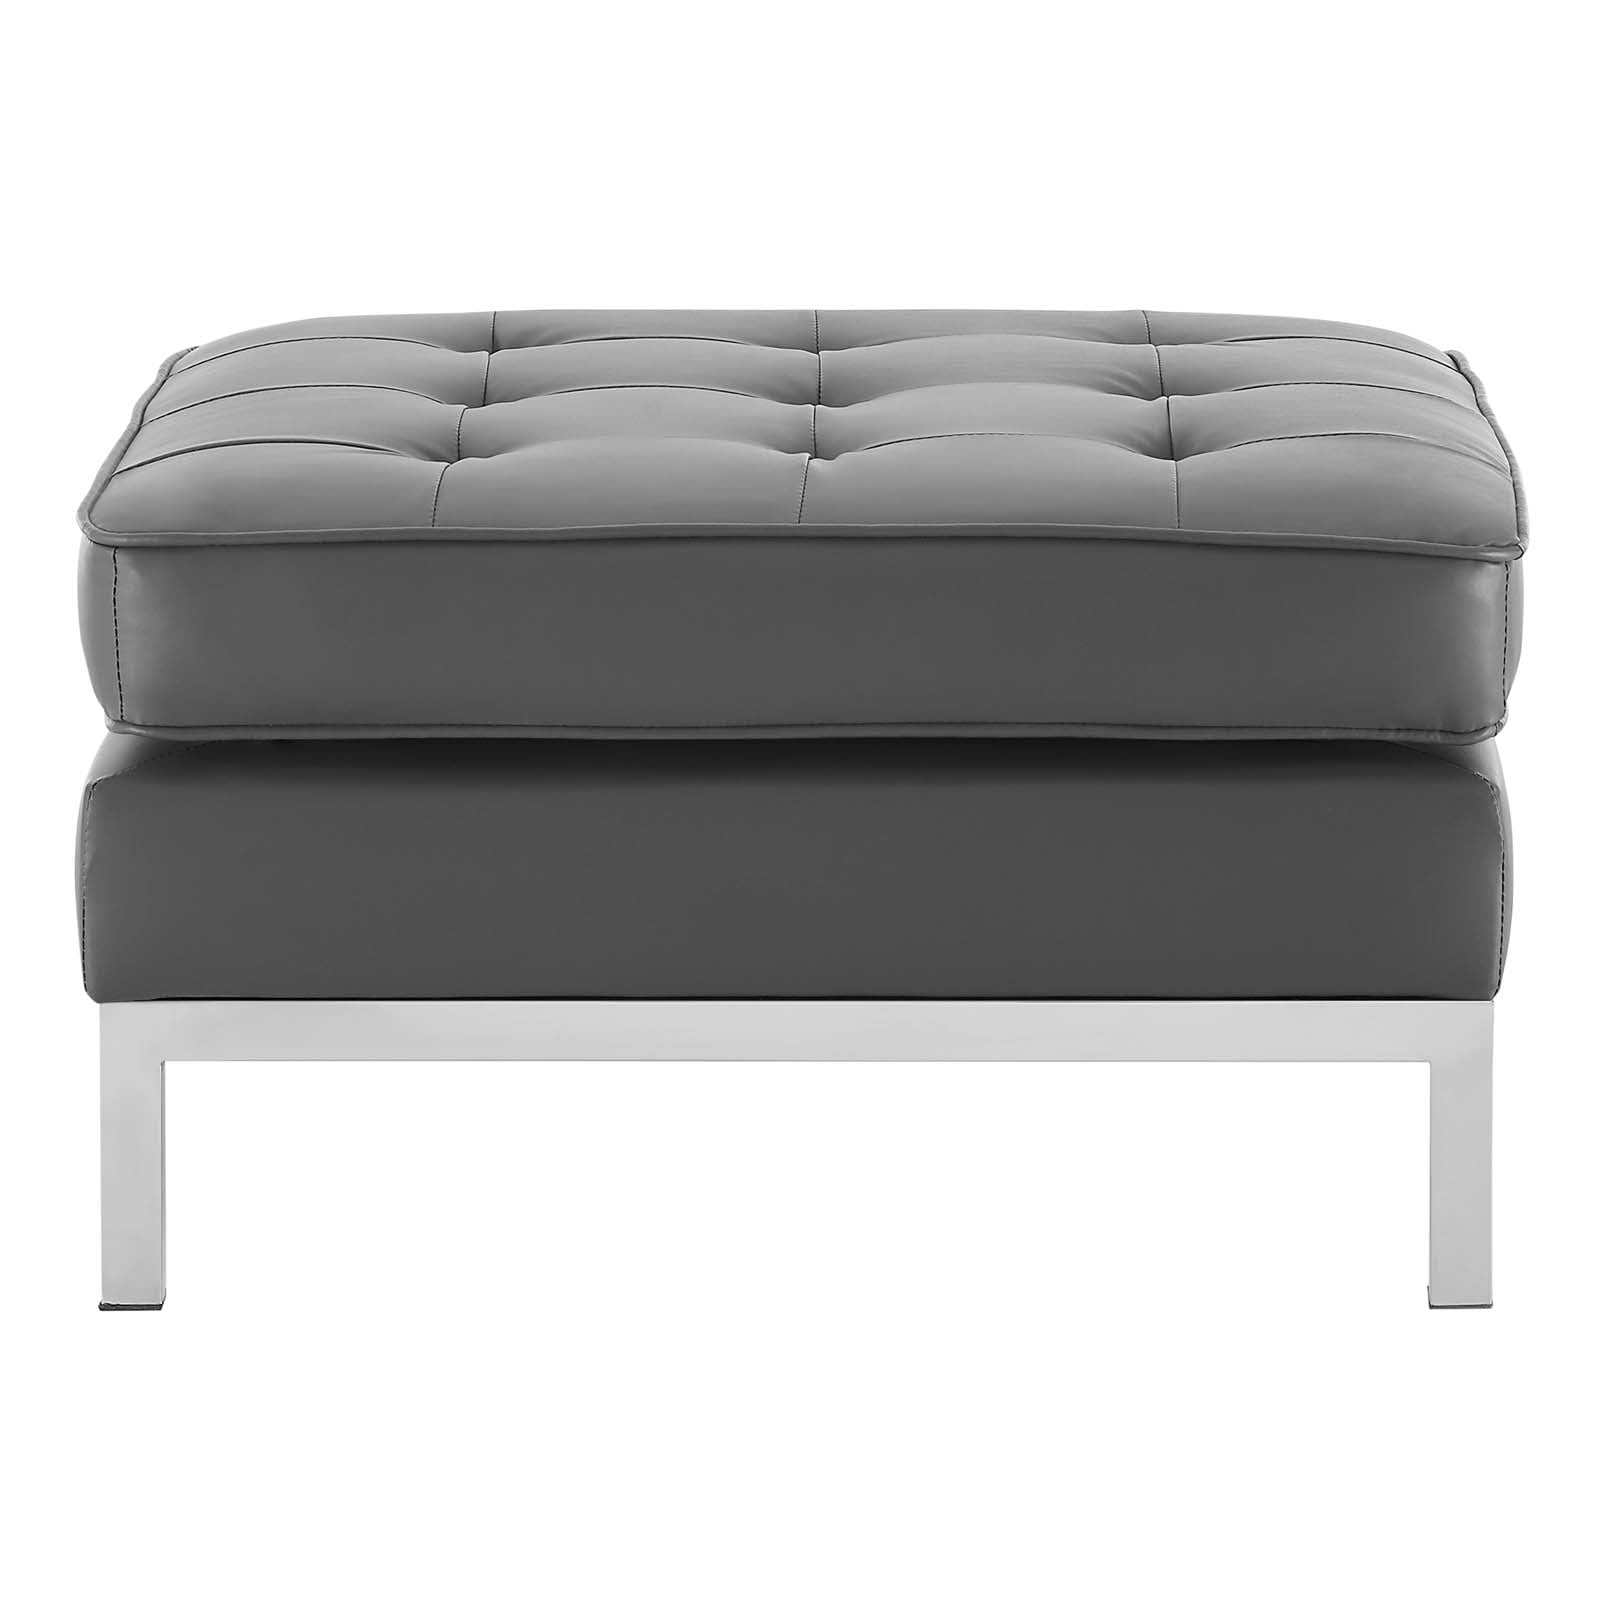 Loft Tufted Upholstered Faux Leather Ottoman - East Shore Modern Home Furnishings